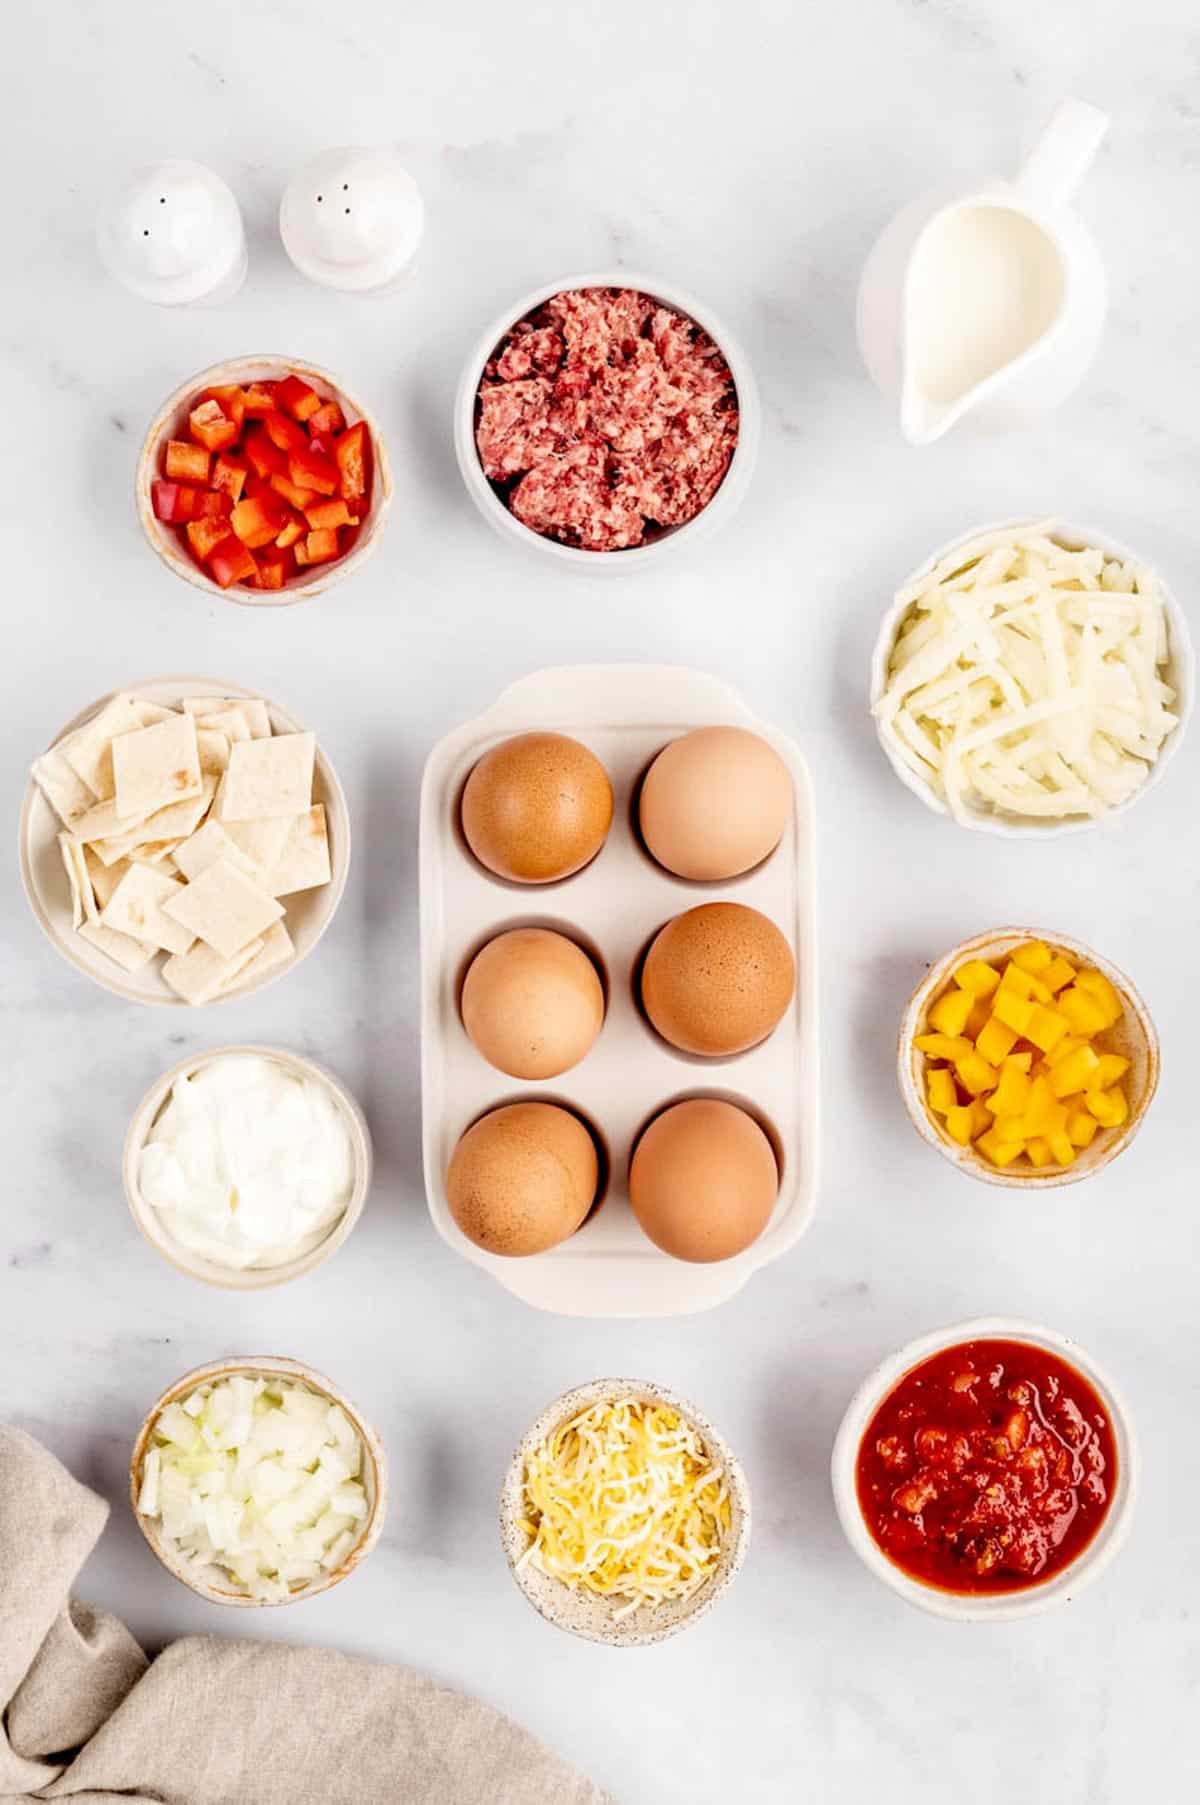 Ingredients required to make the breakfast burrito casserole recipe.